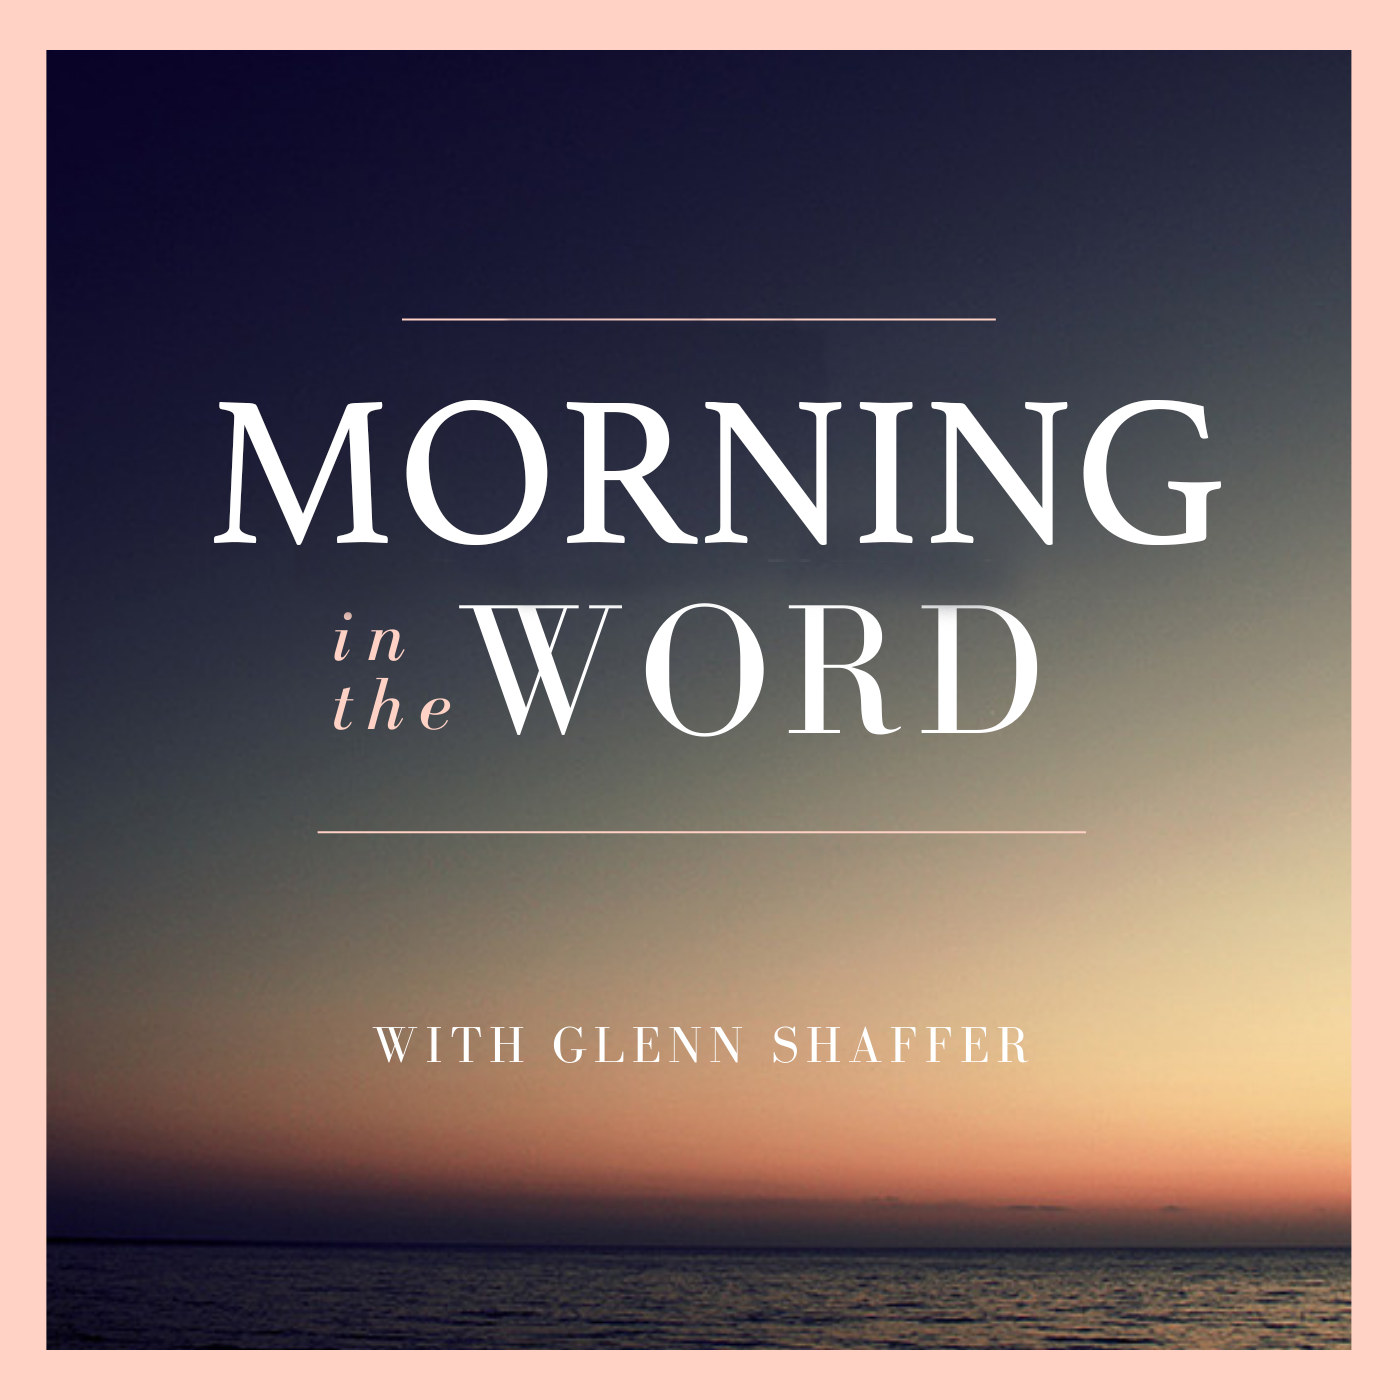 Morning in the Word